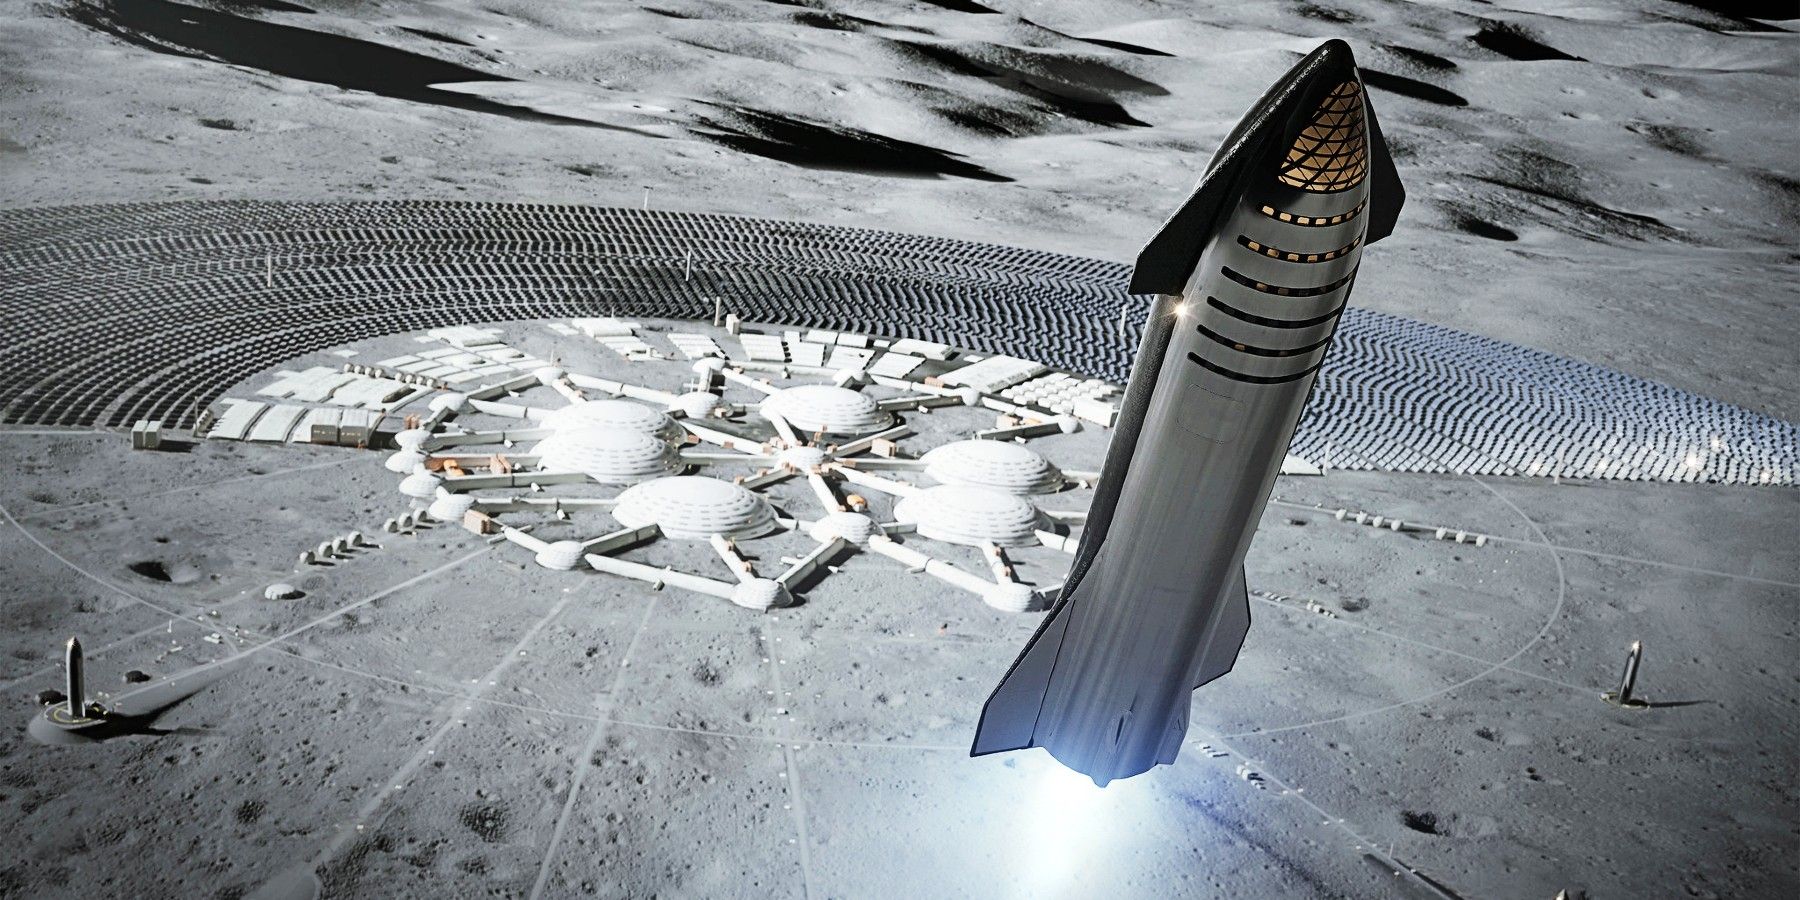 SpaceX’s Starship Is Set To Transform The Future of Space Exploration